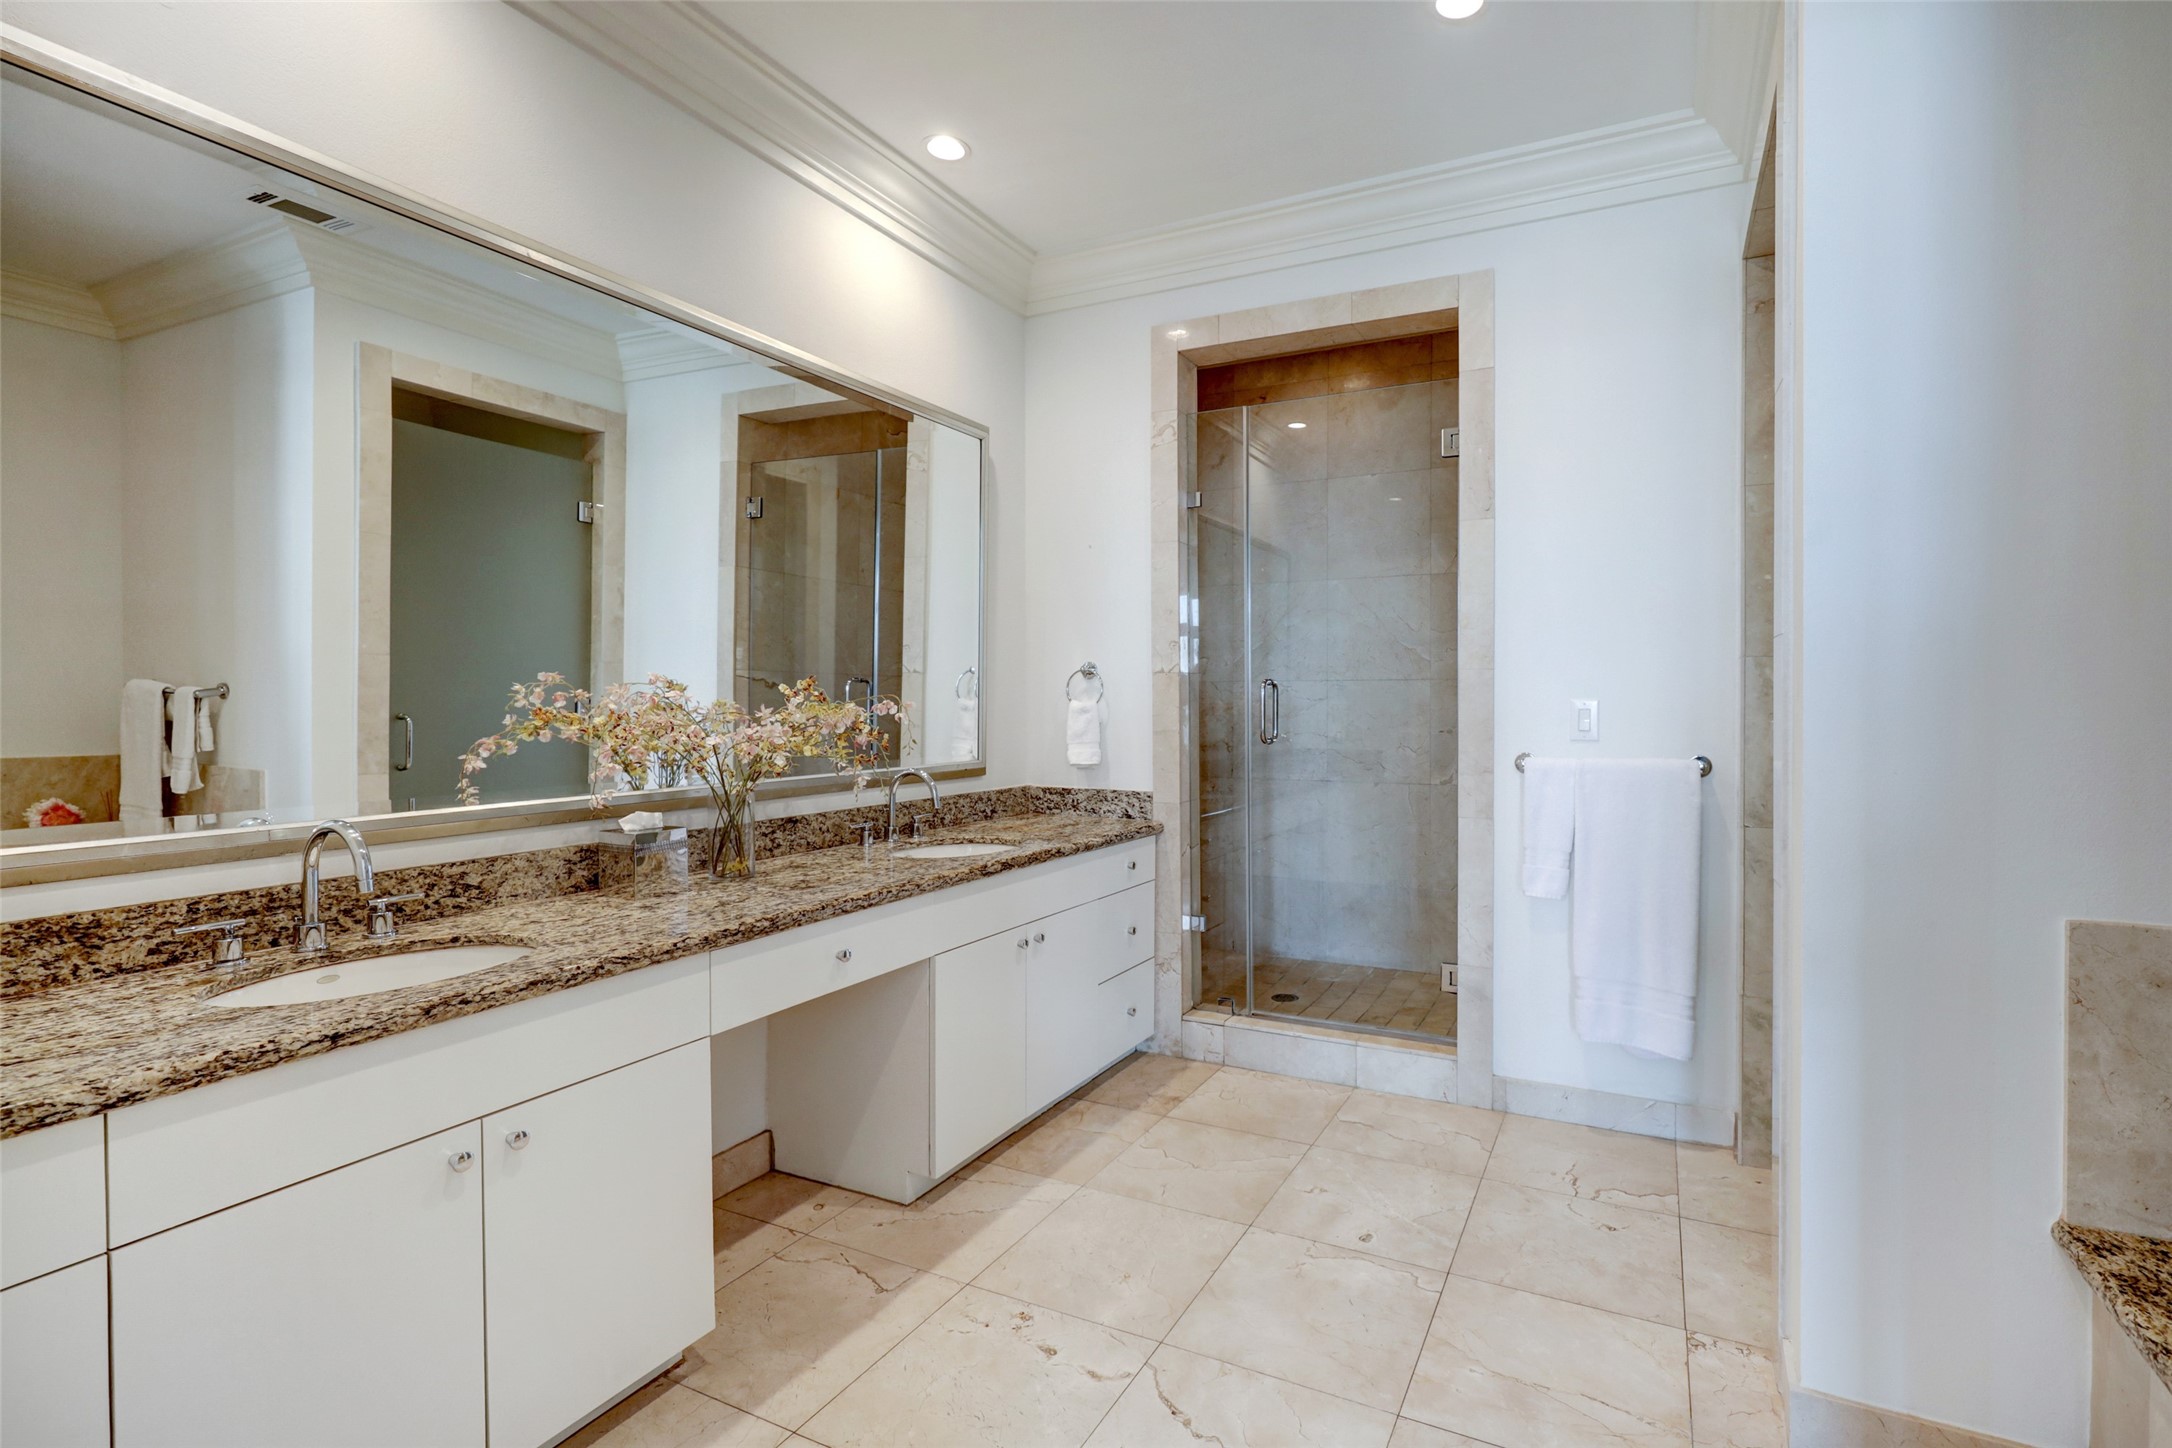 Primary bathroom with double sink vanity, large marble shower and granite counters.